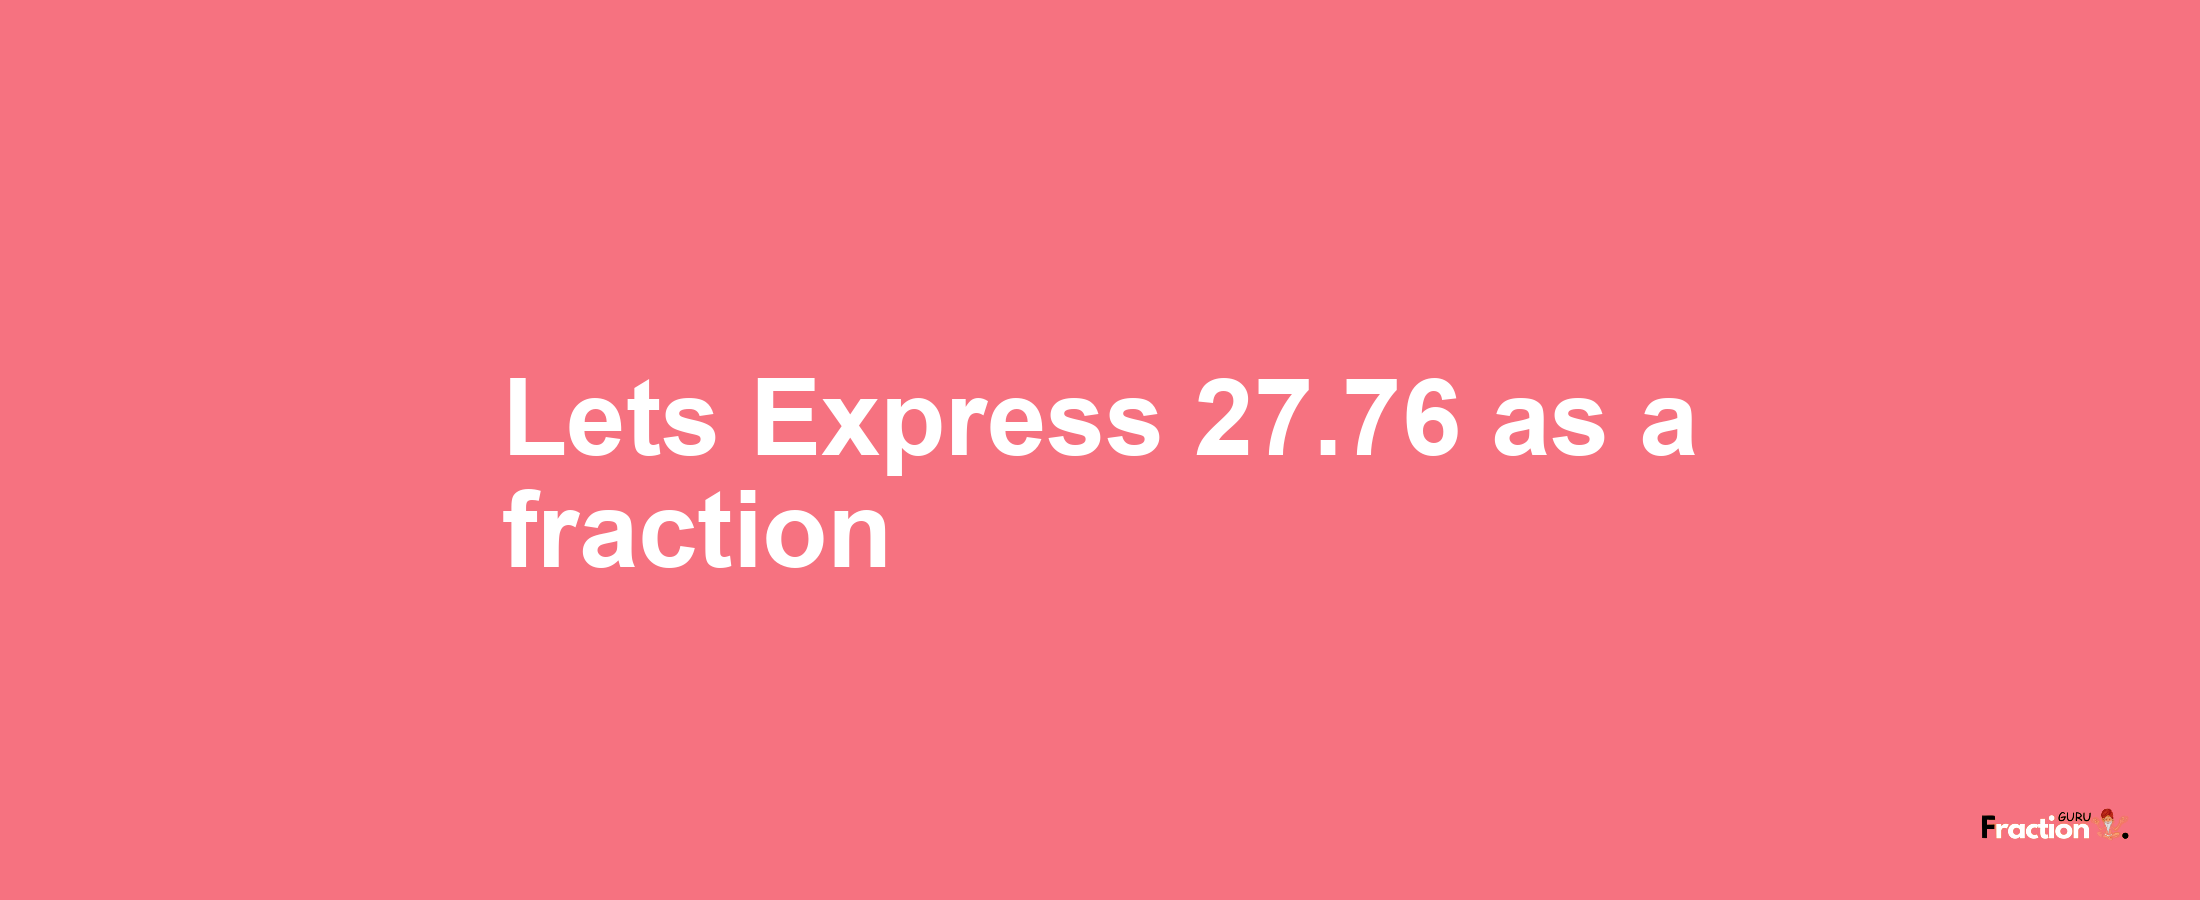 Lets Express 27.76 as afraction